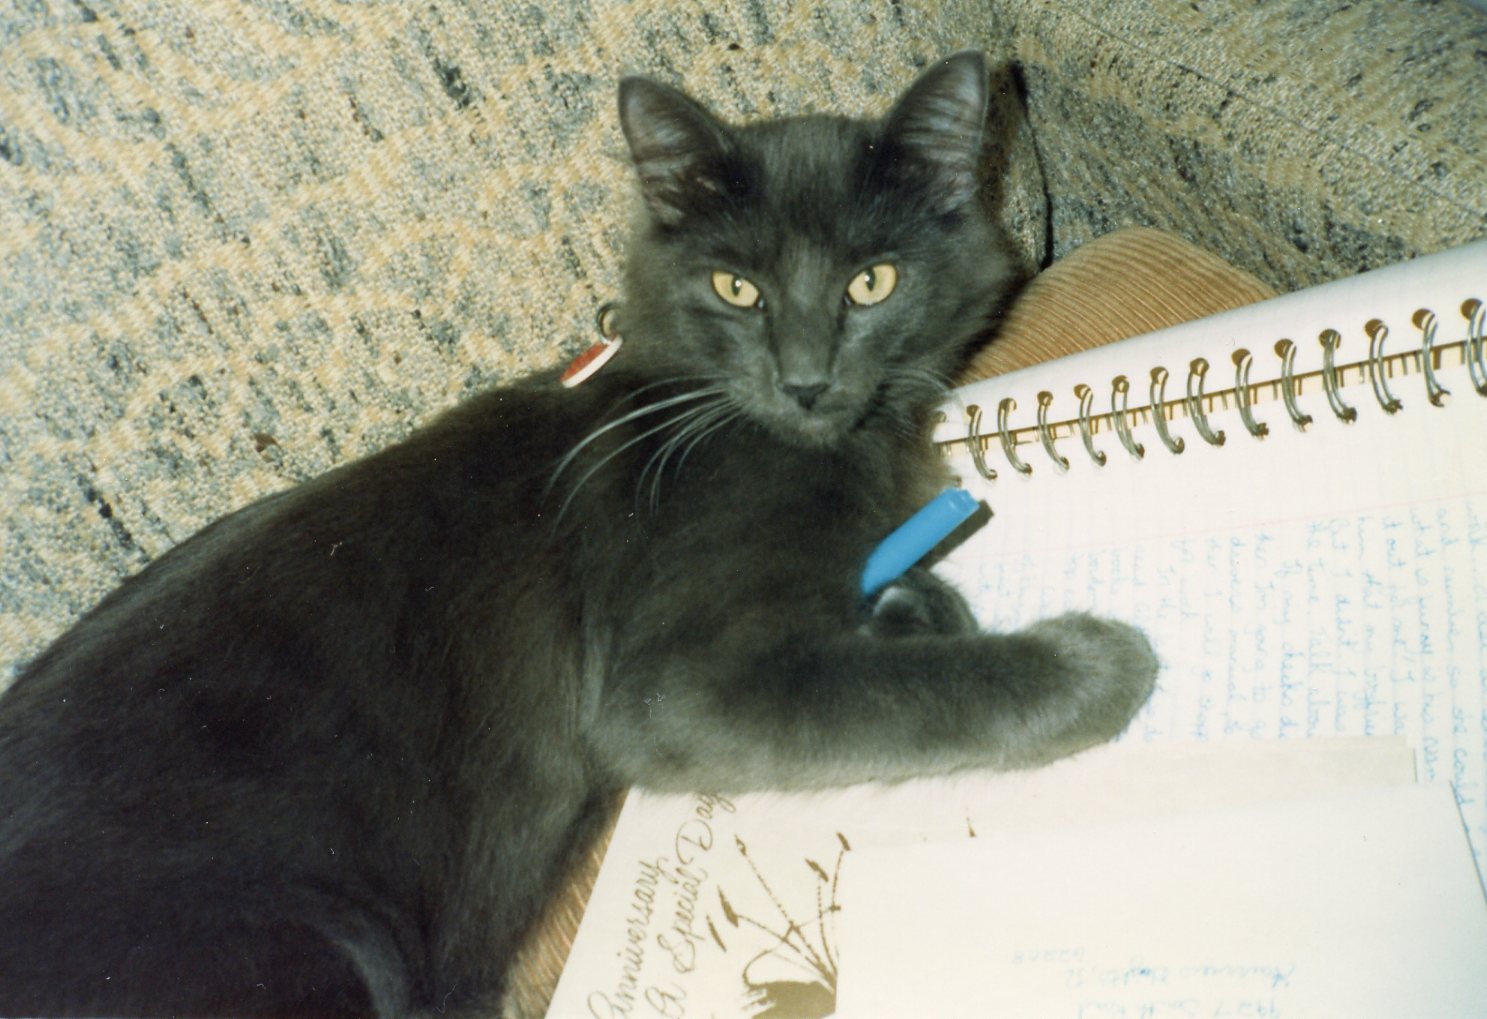 Grey cat on couch with notebook and pen